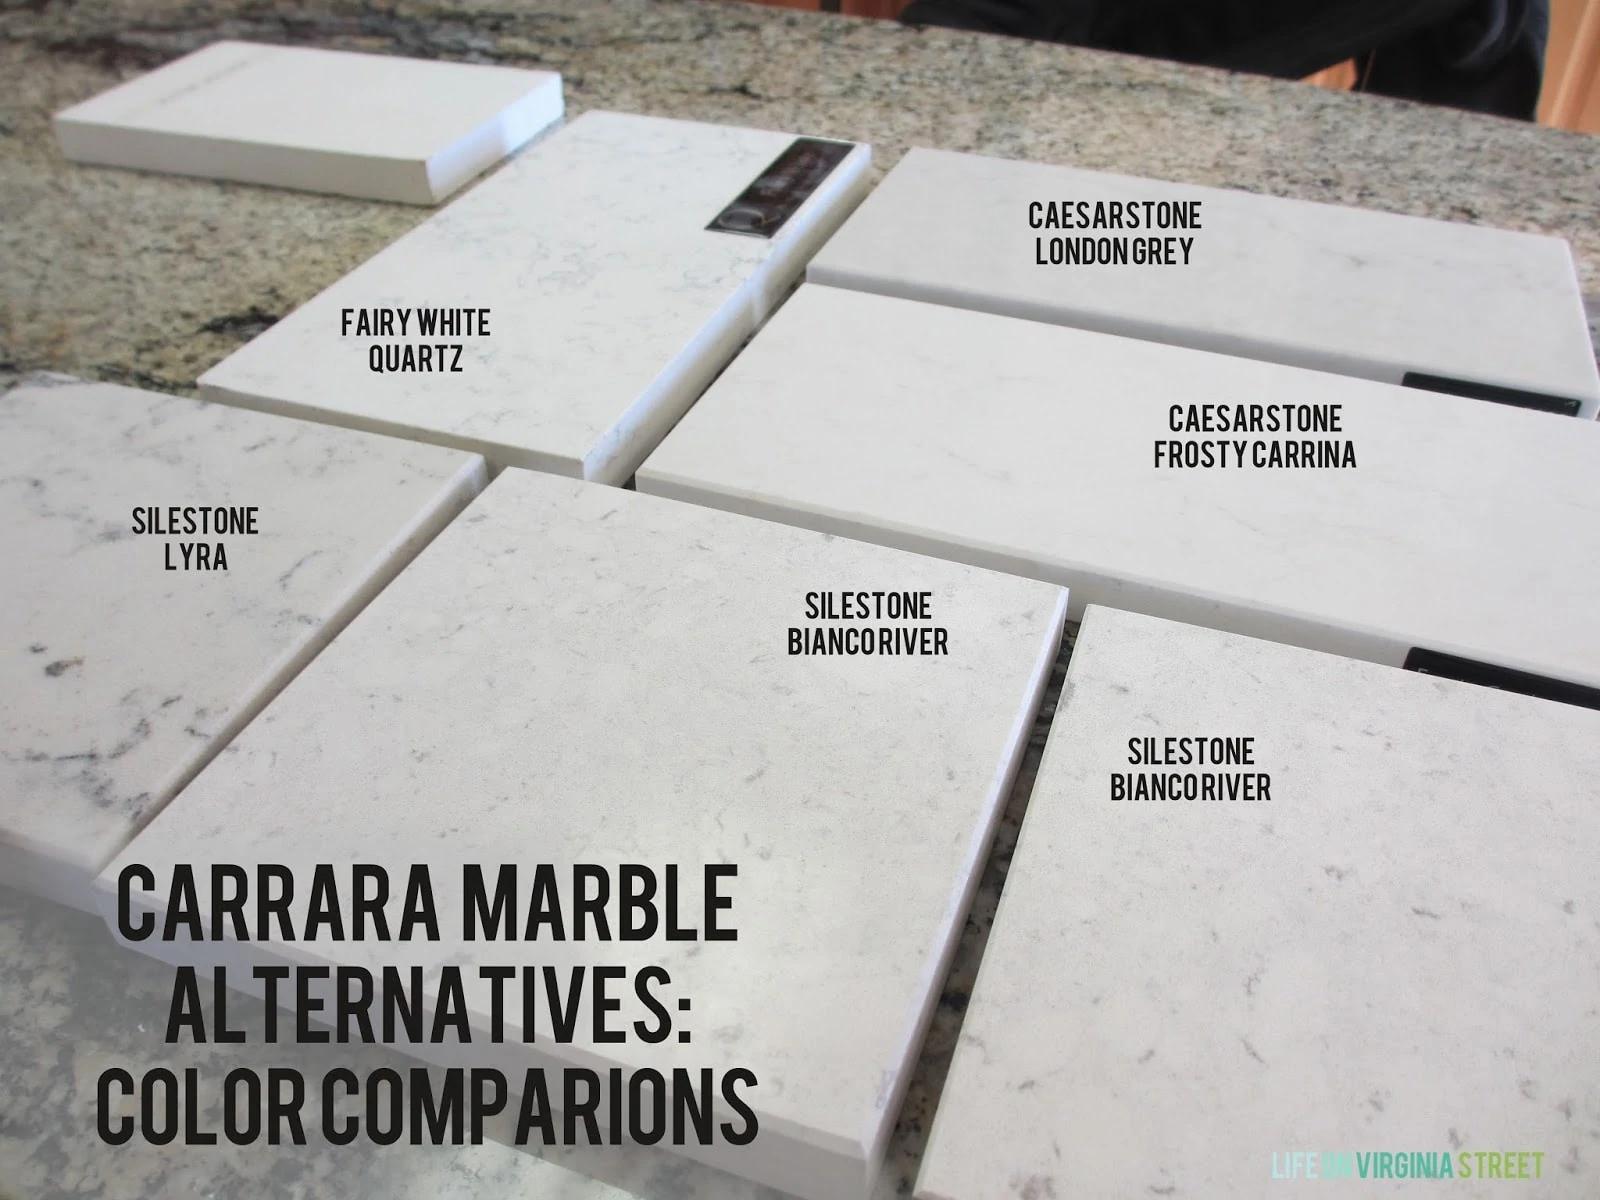 Carrara marble alternatives color comparisons. This is really helpful for finding a more durable alternative!